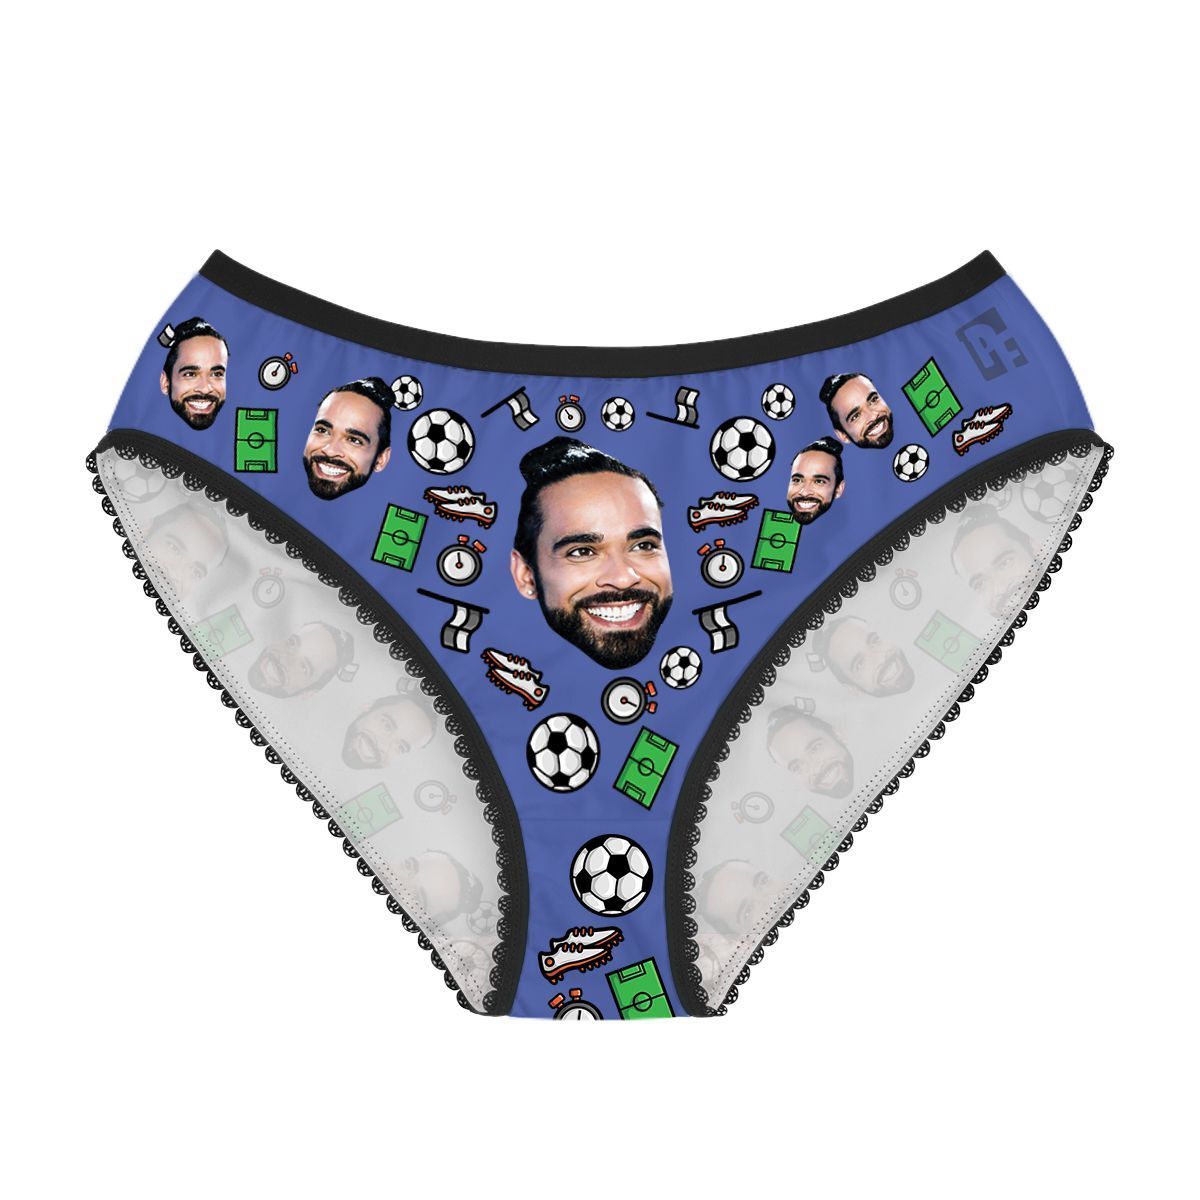 Darkblue Football women's underwear briefs personalized with photo printed on them